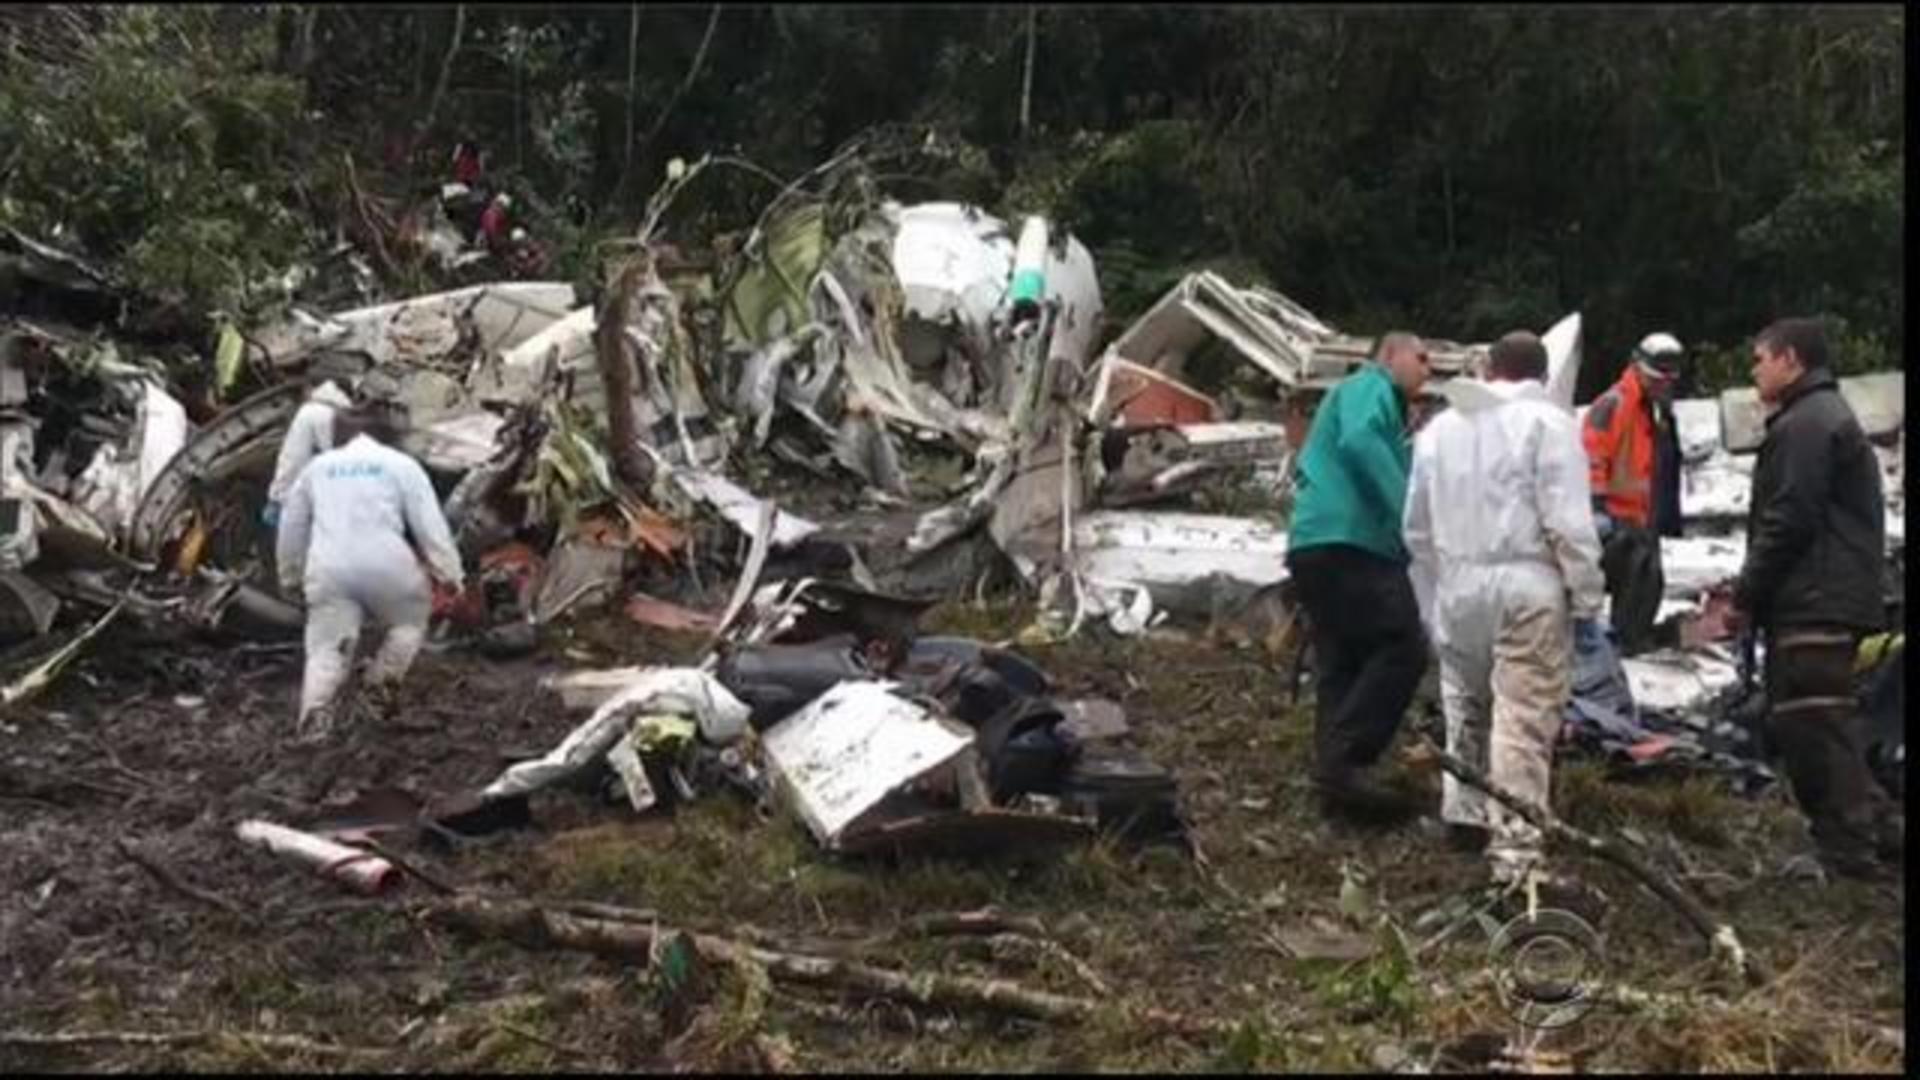 SYND 10 9 74 BODIES OF TWA CRASH VICTIMS ARRIVE 